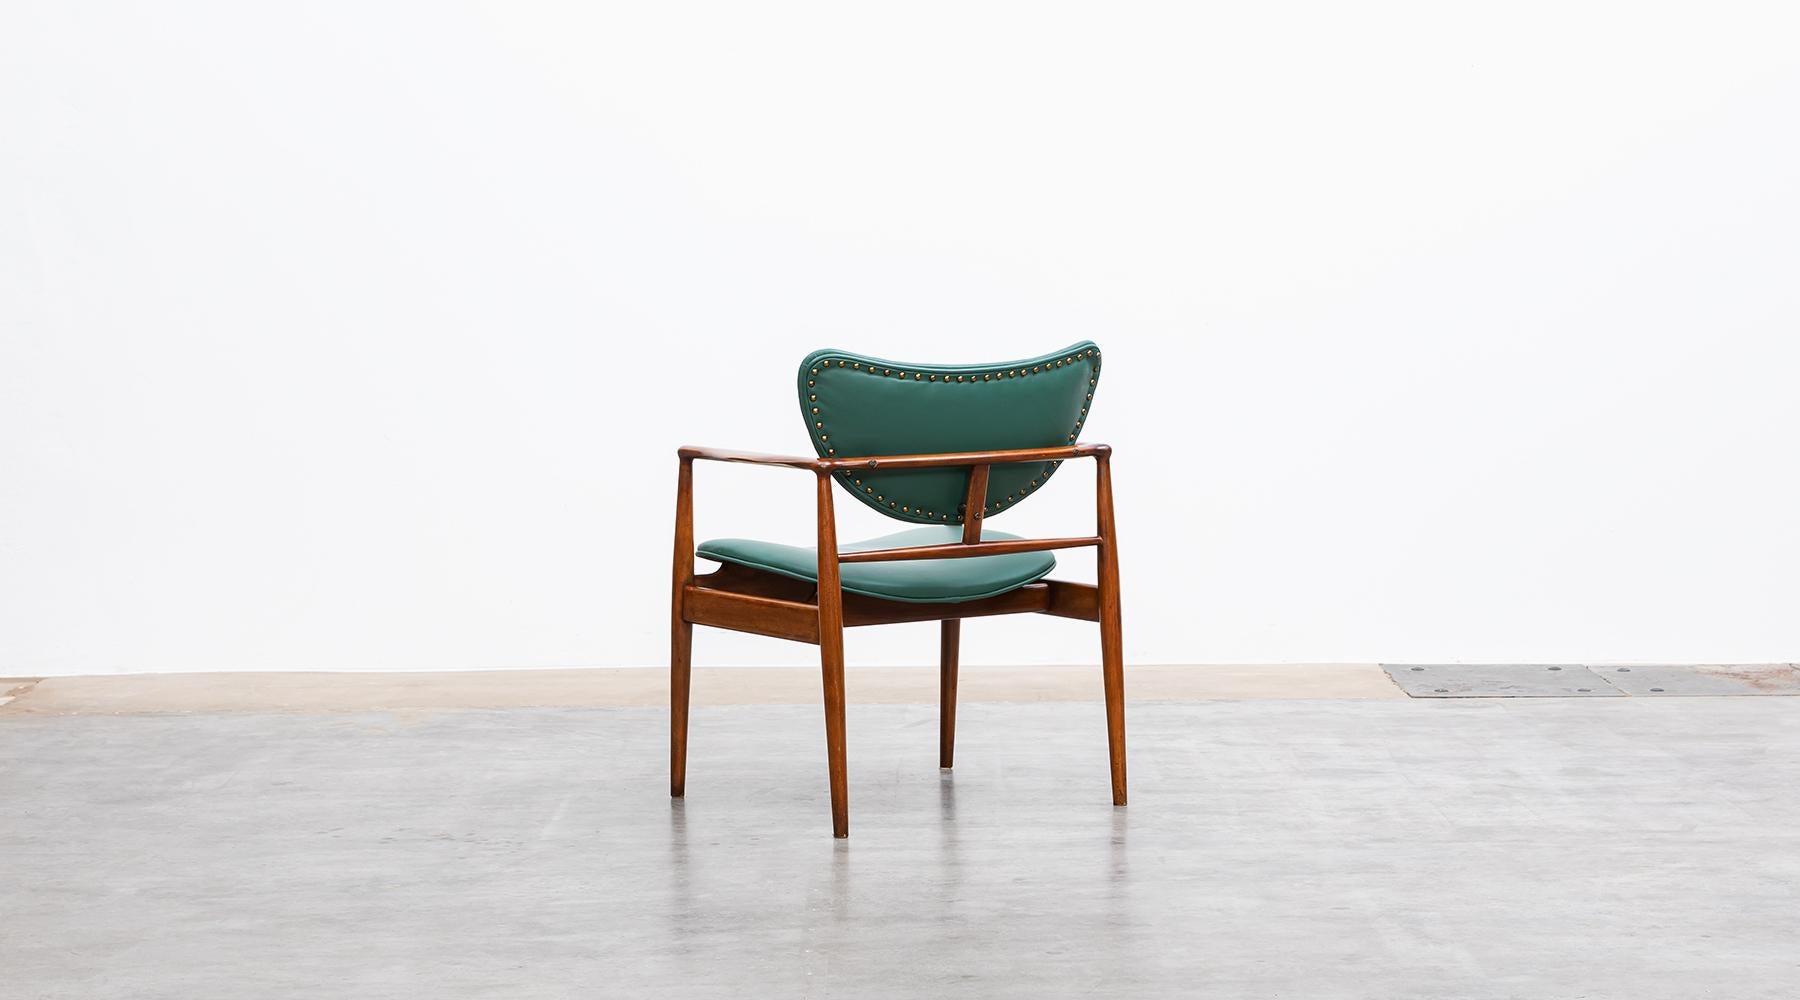 1950s Teak and green faux leather Chair by Finn Juhl For Sale 3